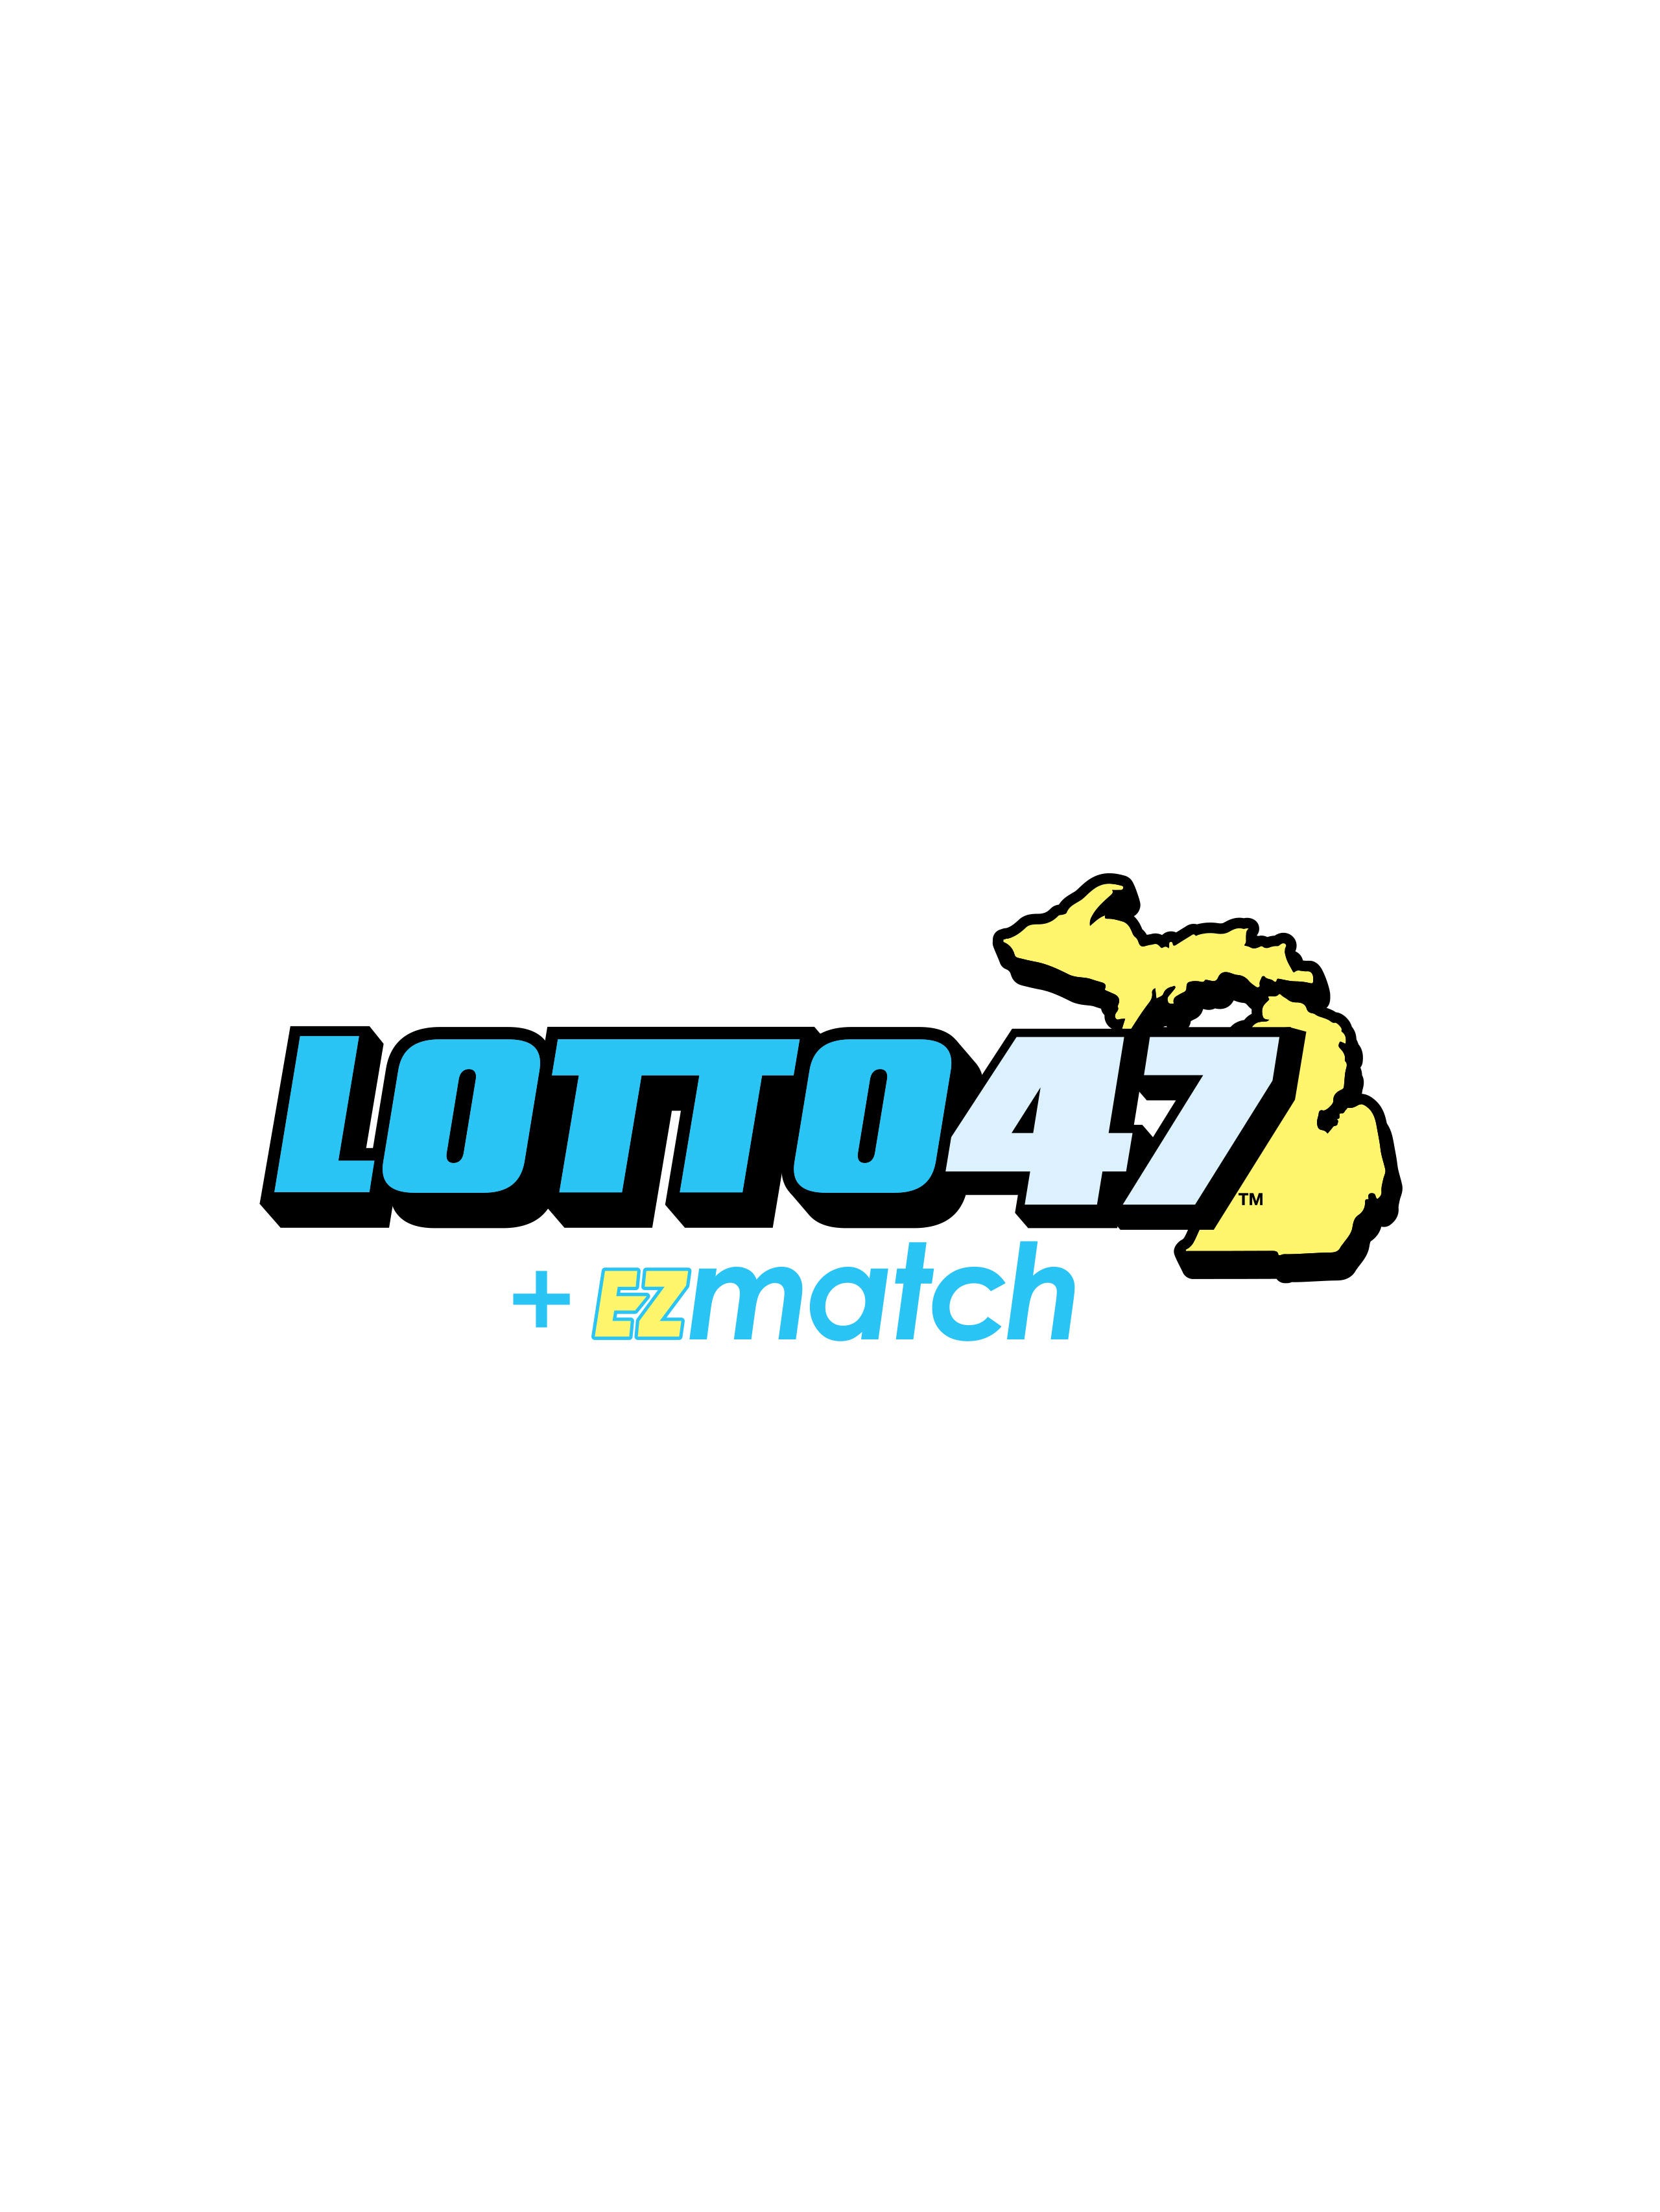 powerball lotto results draw 1181